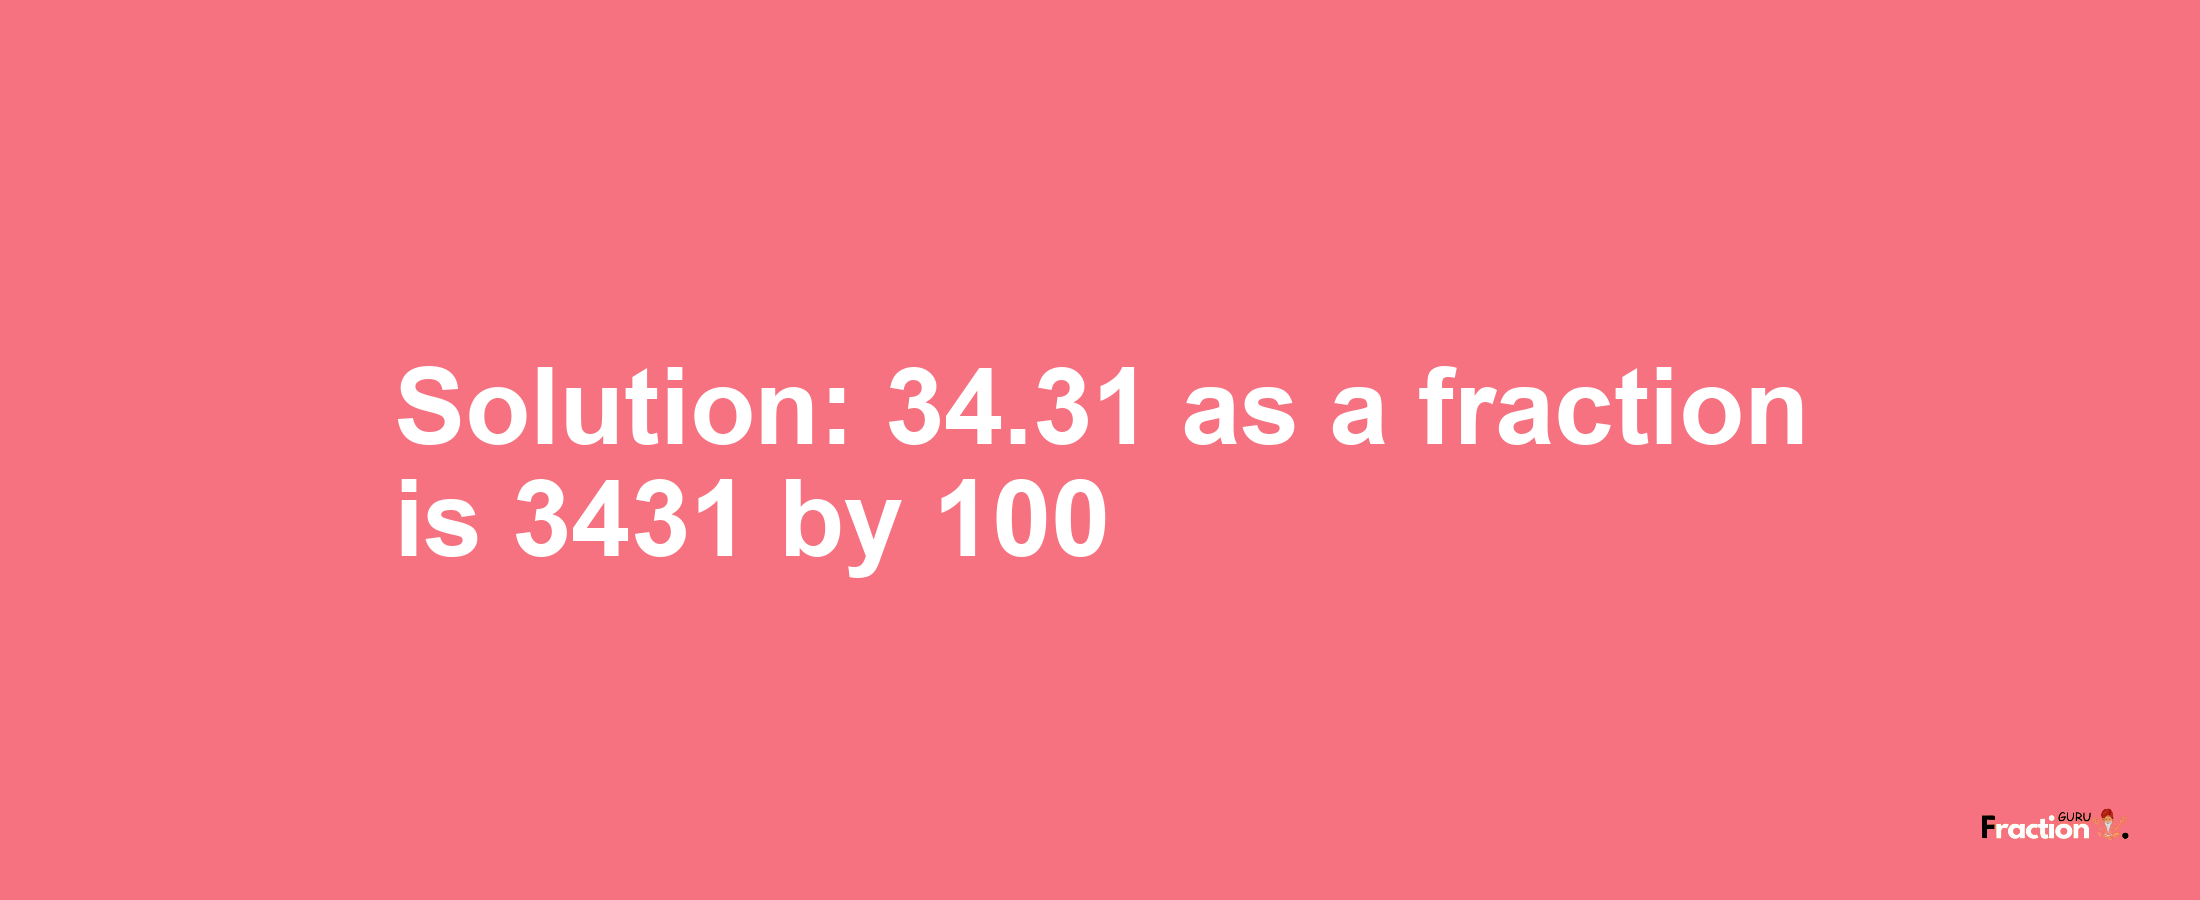 Solution:34.31 as a fraction is 3431/100